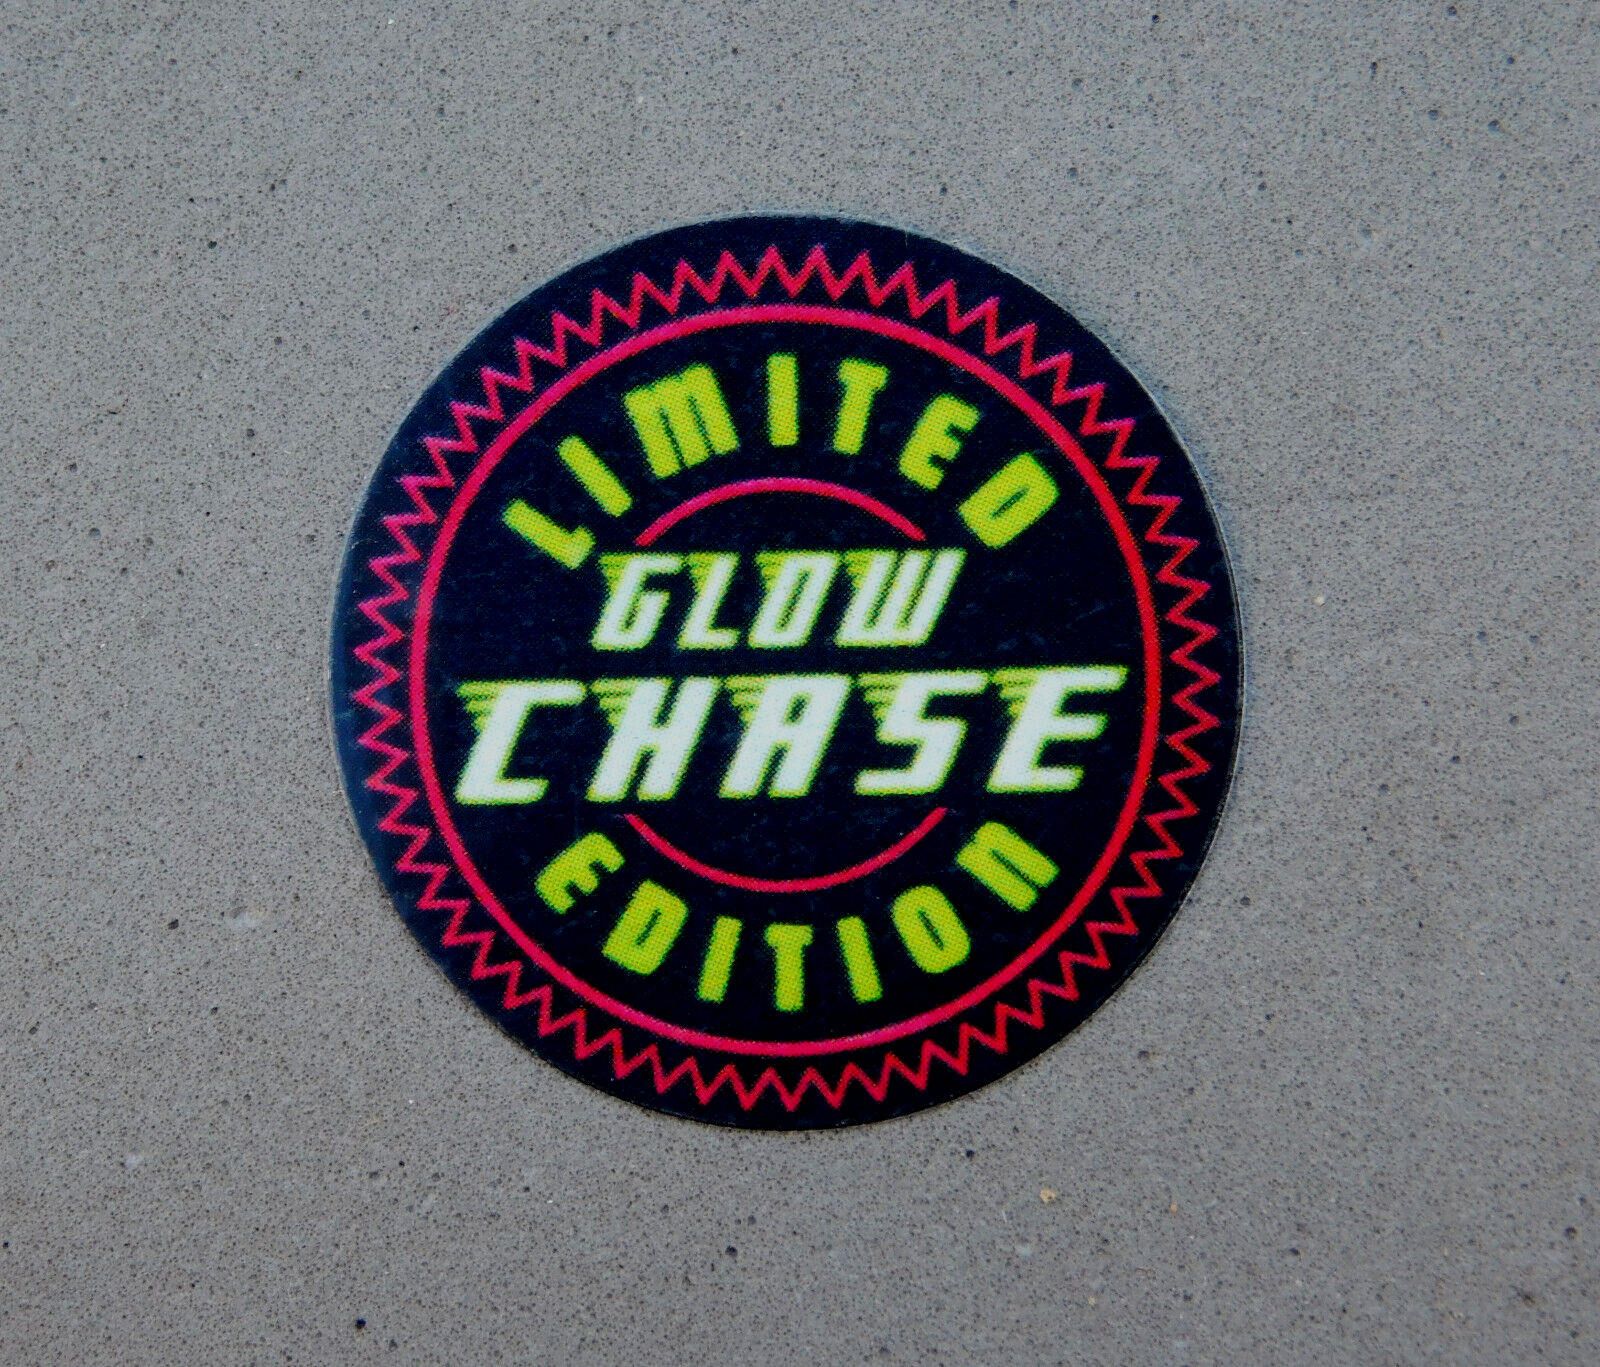 FUNKO POP REPRODUCTION REPLACEMENT GLOW IN THE DARK CHASE STICKER